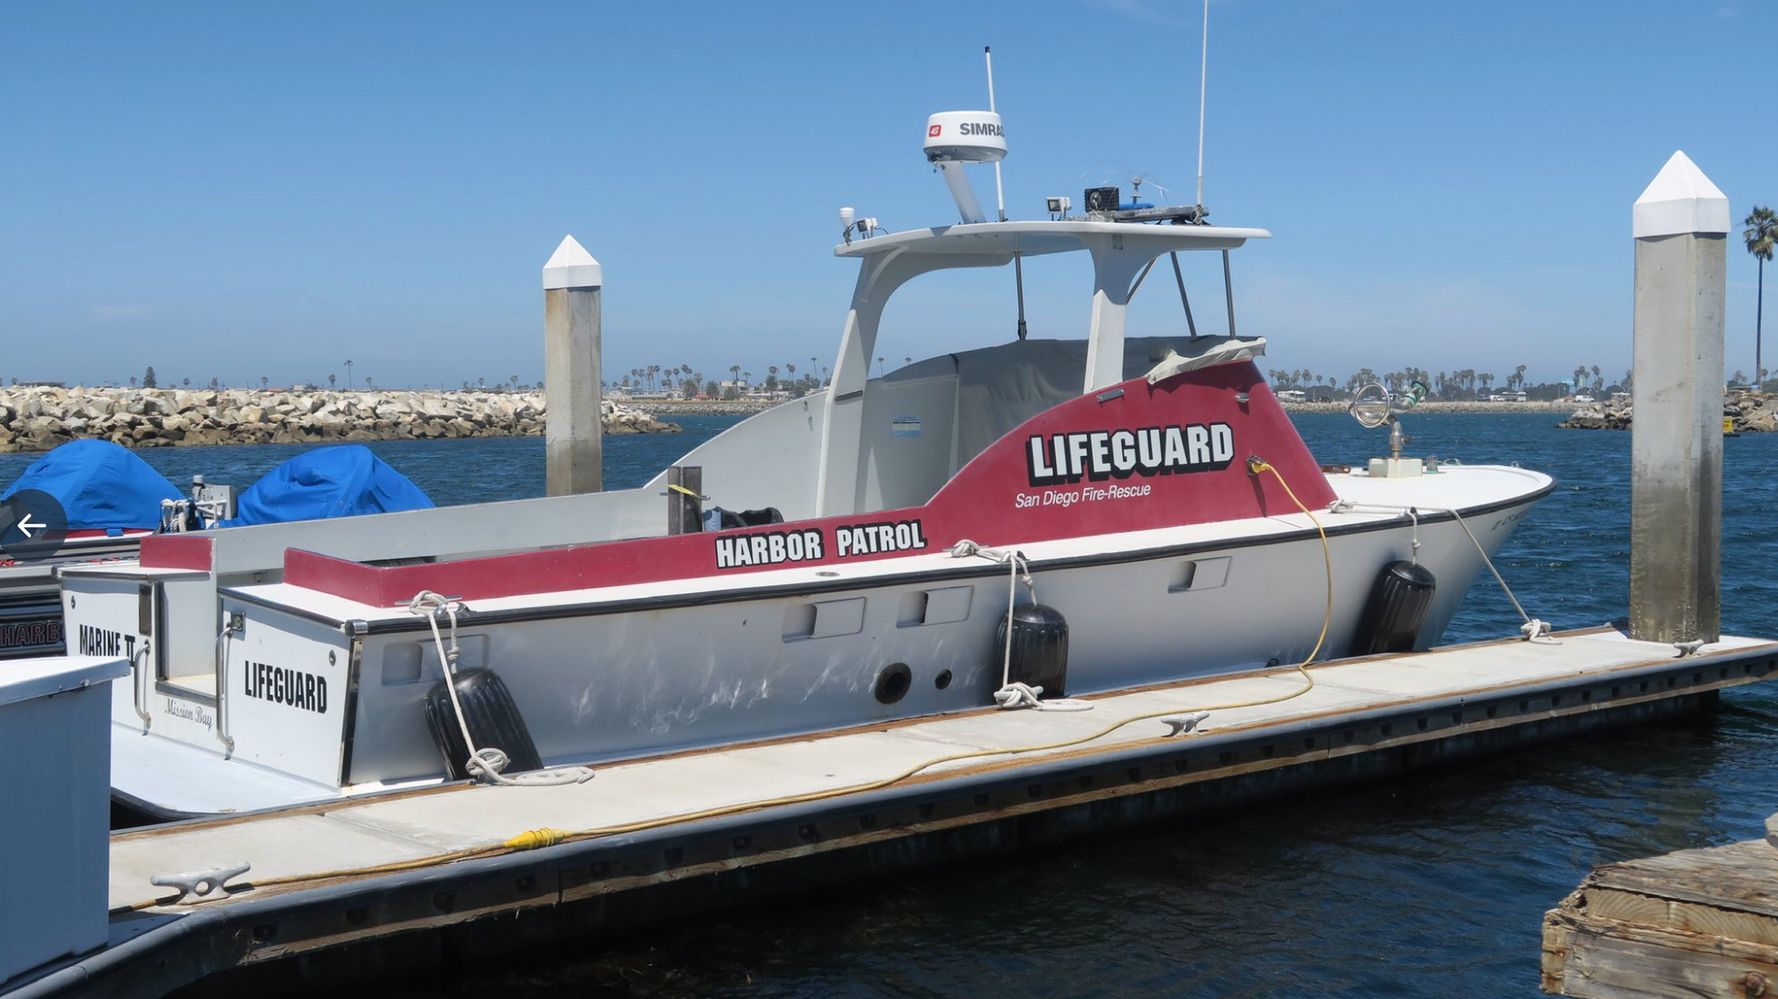 2 Killed, 23 Hurt After Boat Capsizes Off San Diego Coast